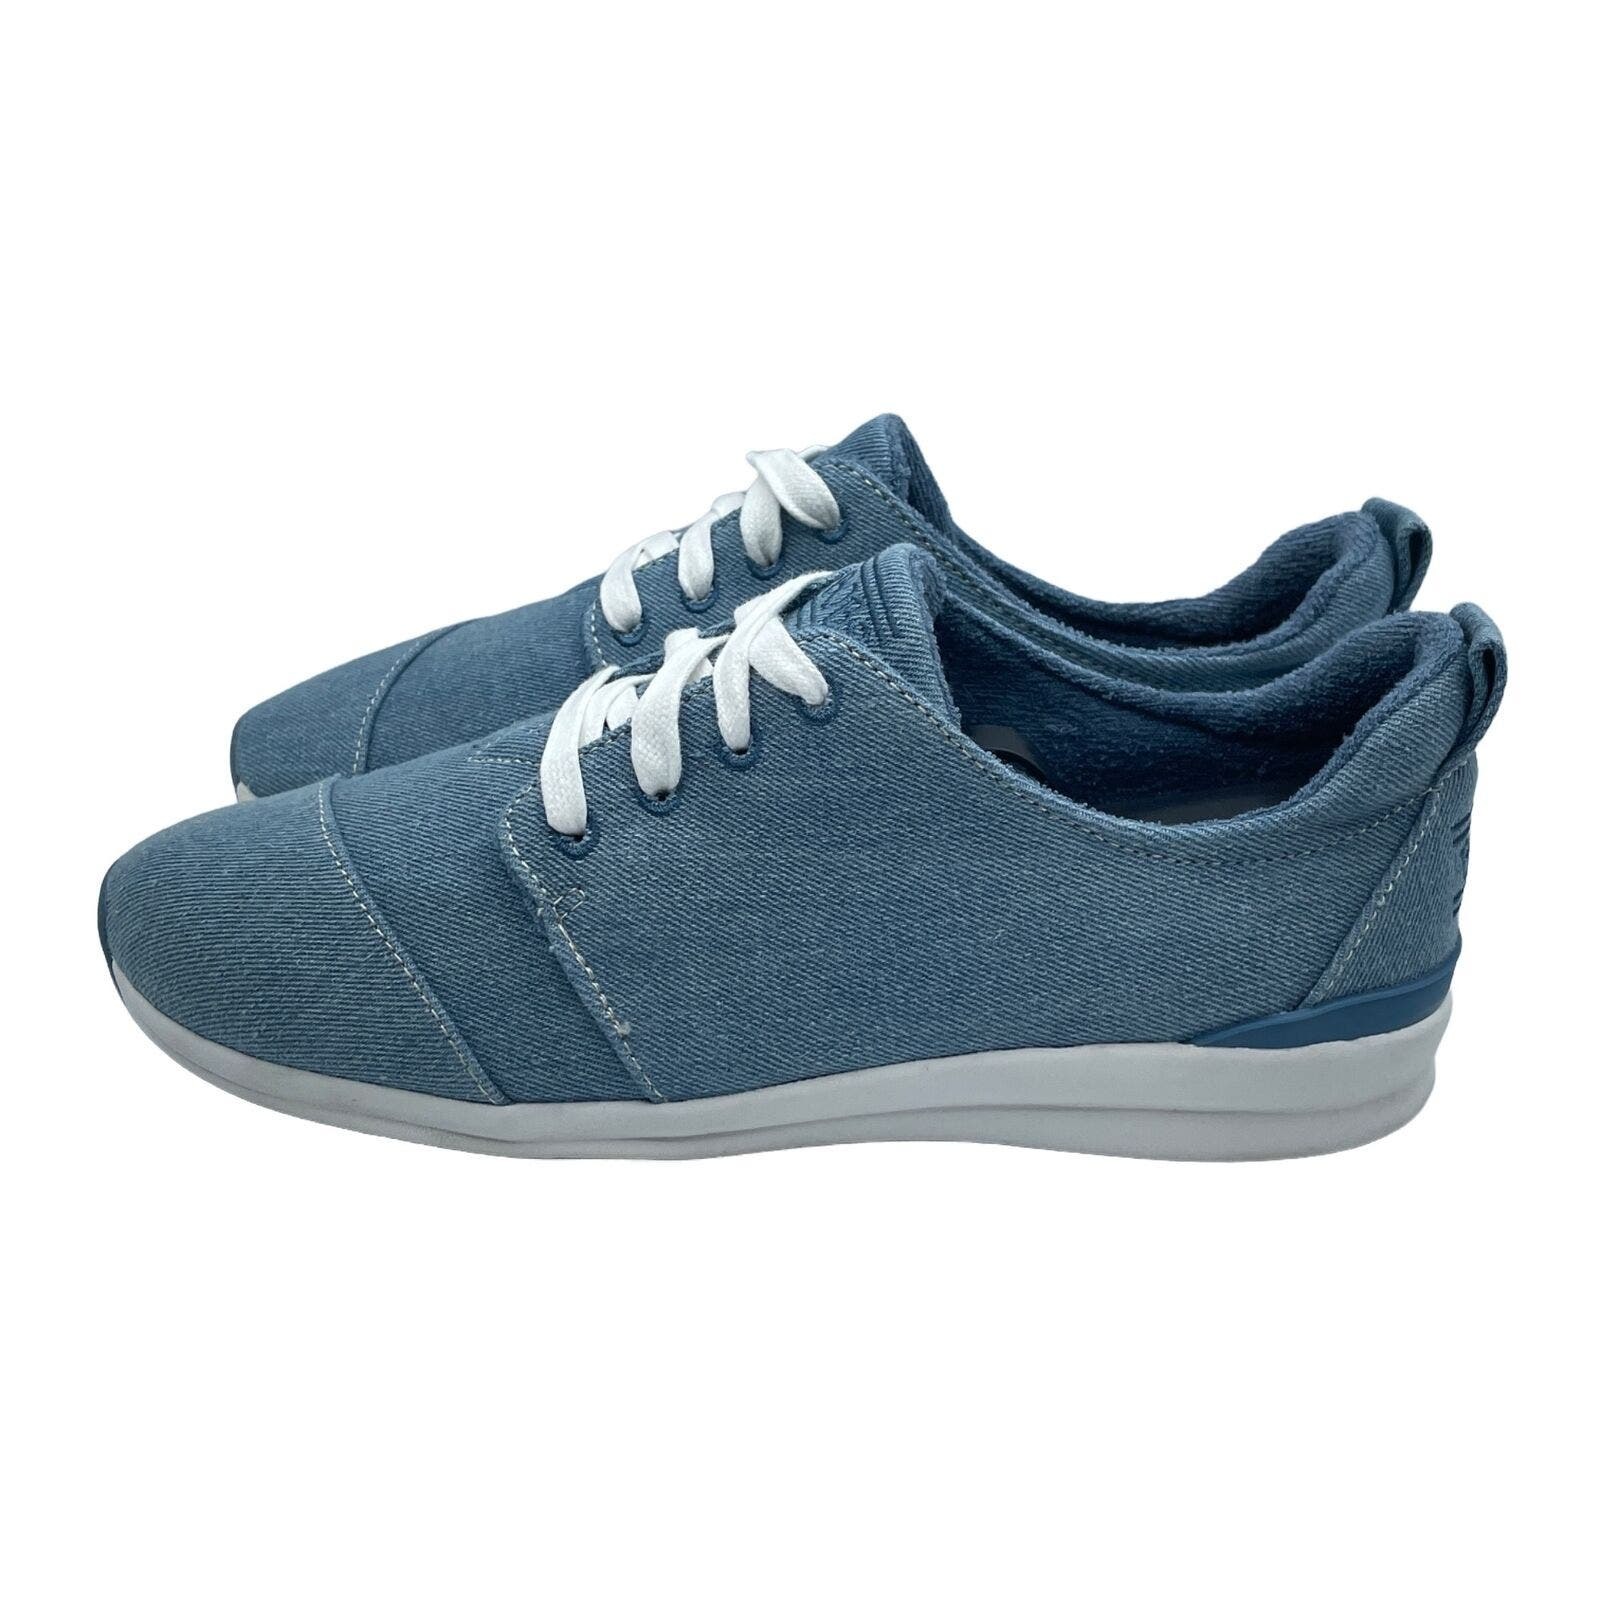 Primary image for Bobs Skechers Phresh Denim Glory Canvas Lace Up Blue Shoes Womens Size 9.5